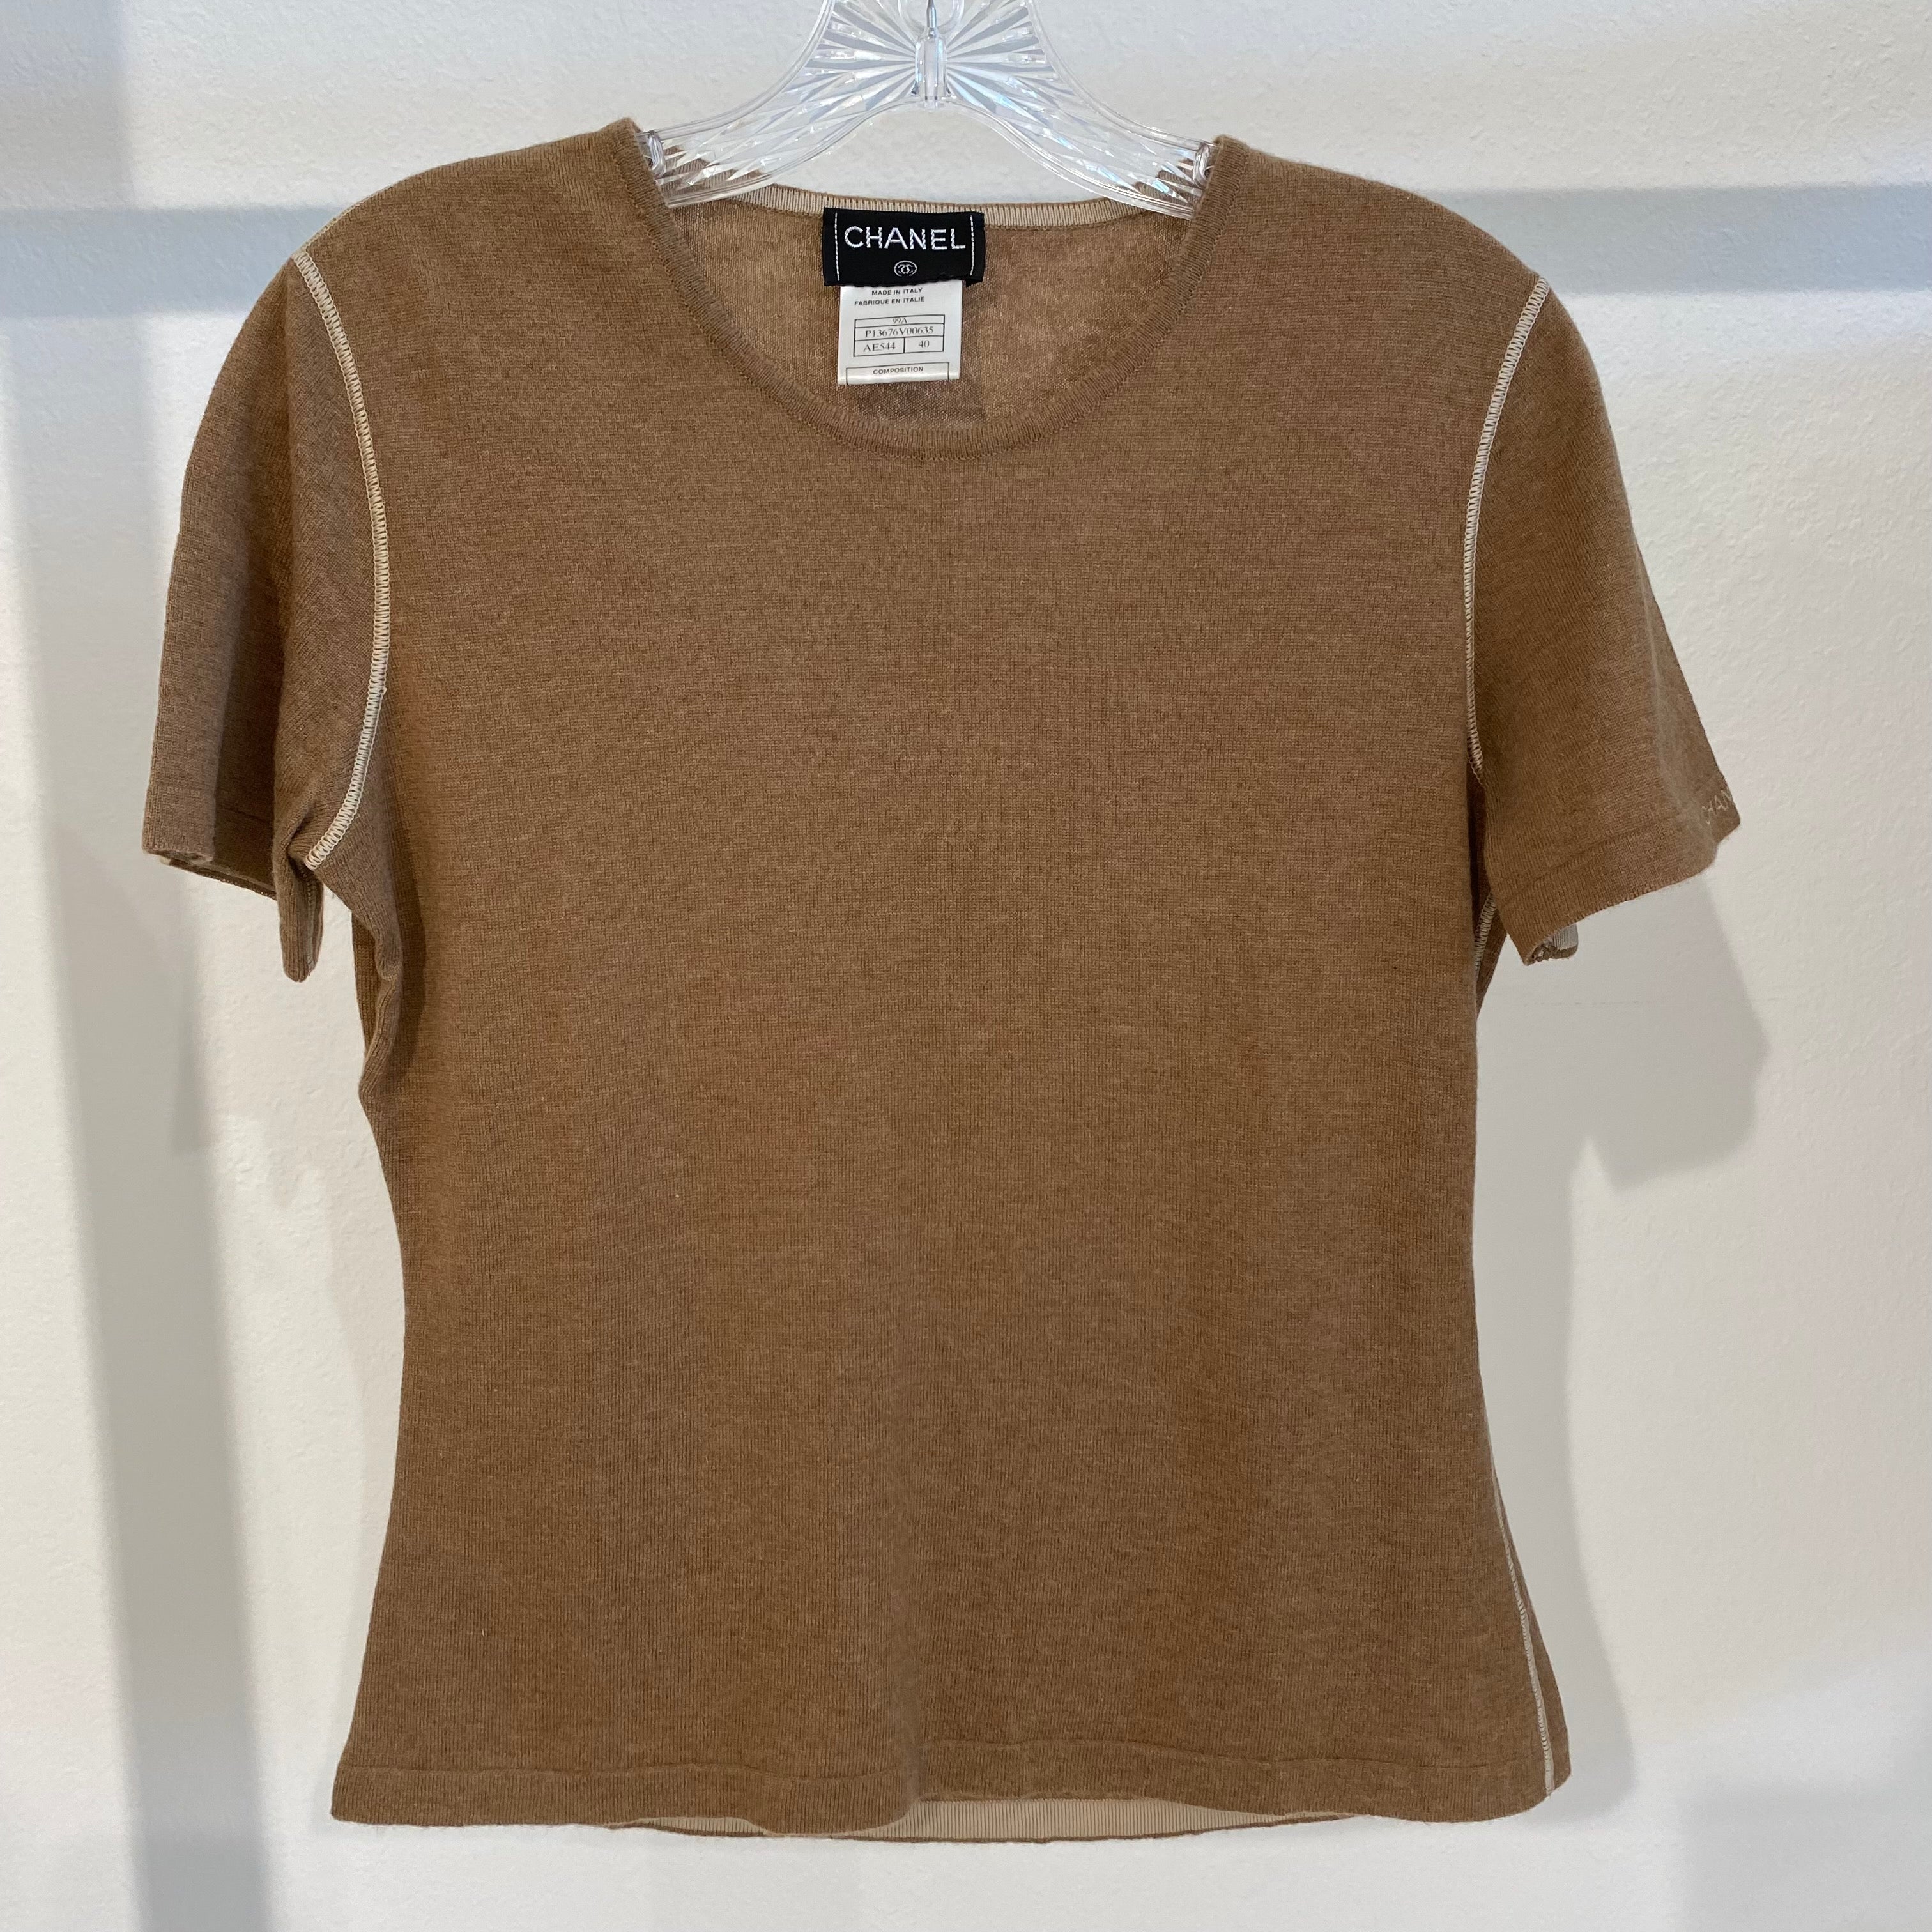 Chanel Brown Knit Top